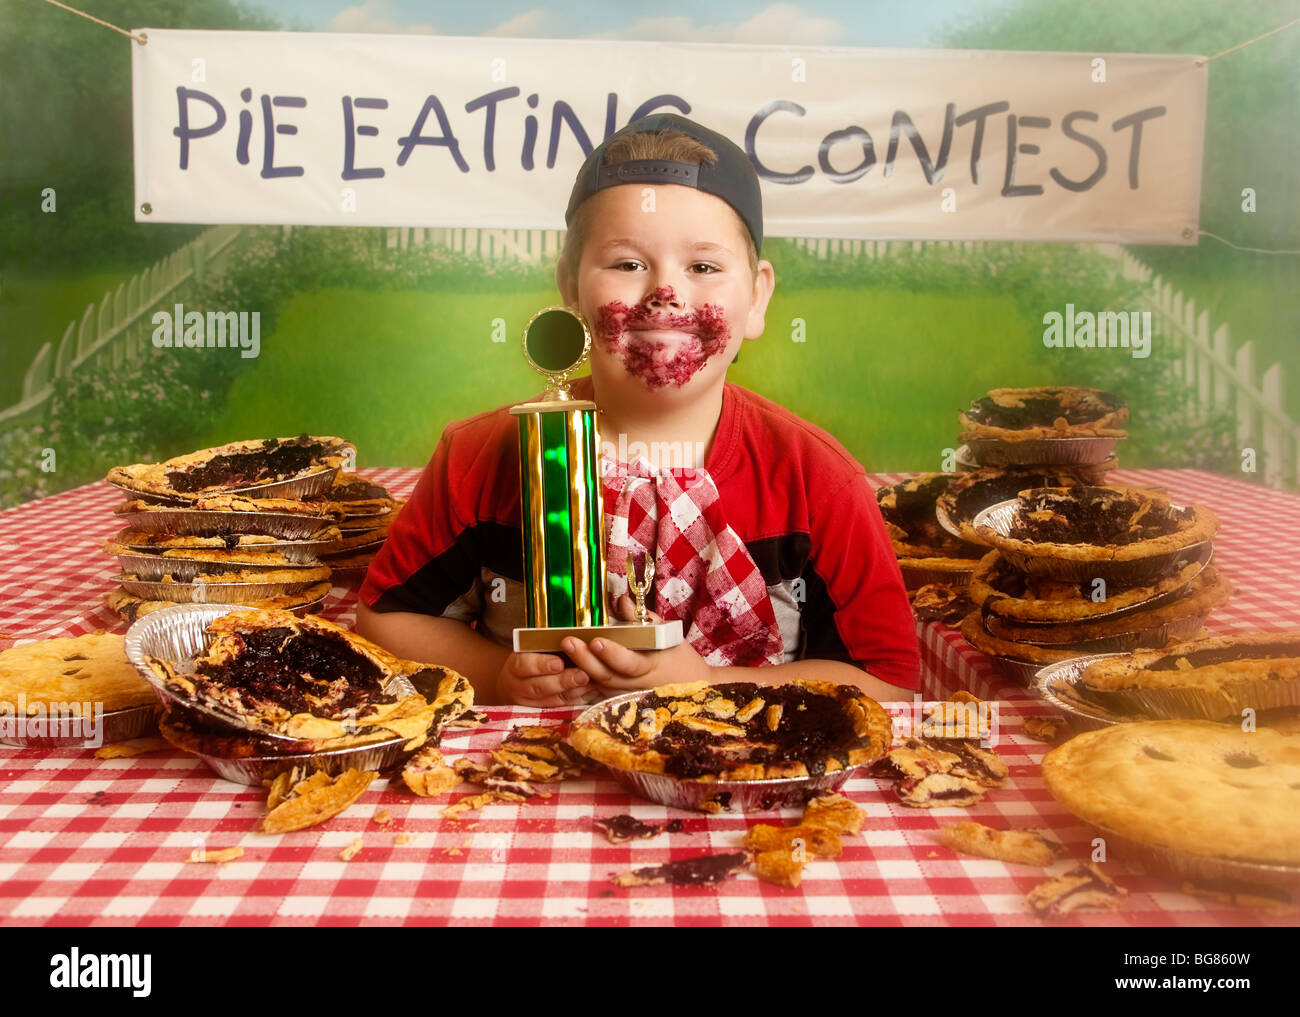 Chubby Boy at the end of a pie eating contest with the winning medal Stock Photo